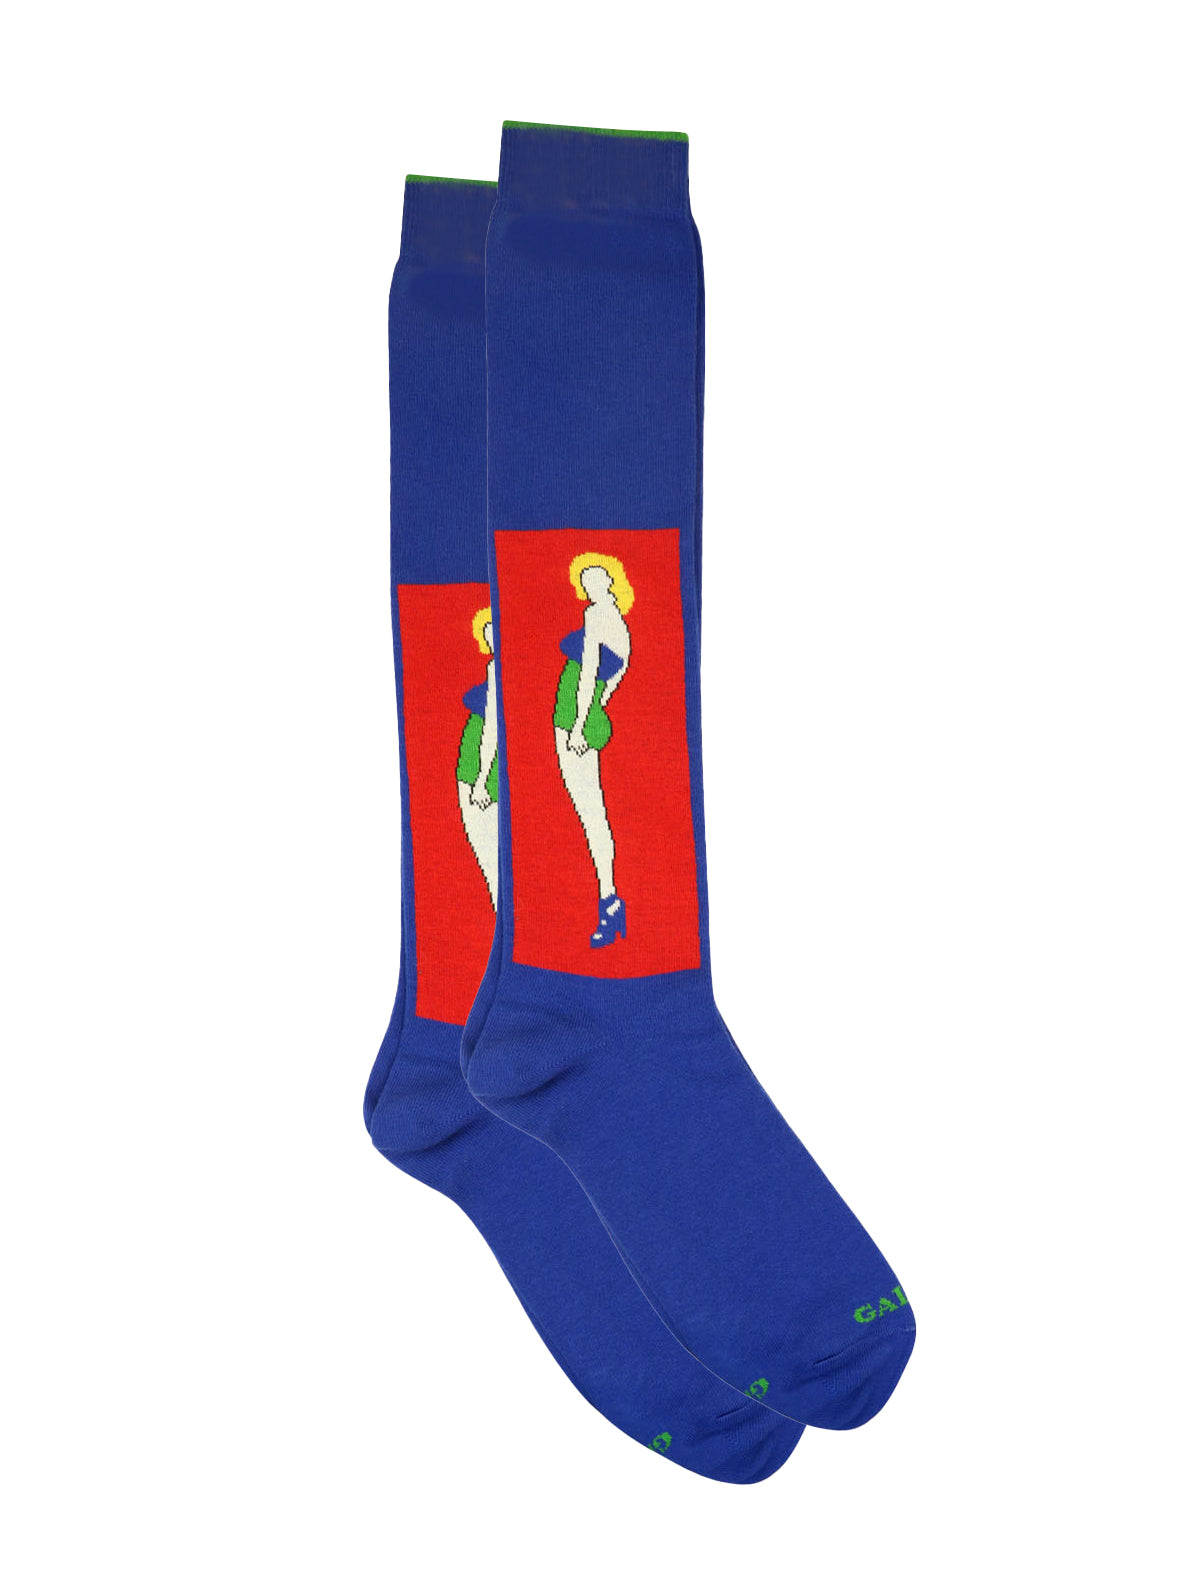 Gallo Long Socks in Cobalt Blue w/ Abstract Character Print